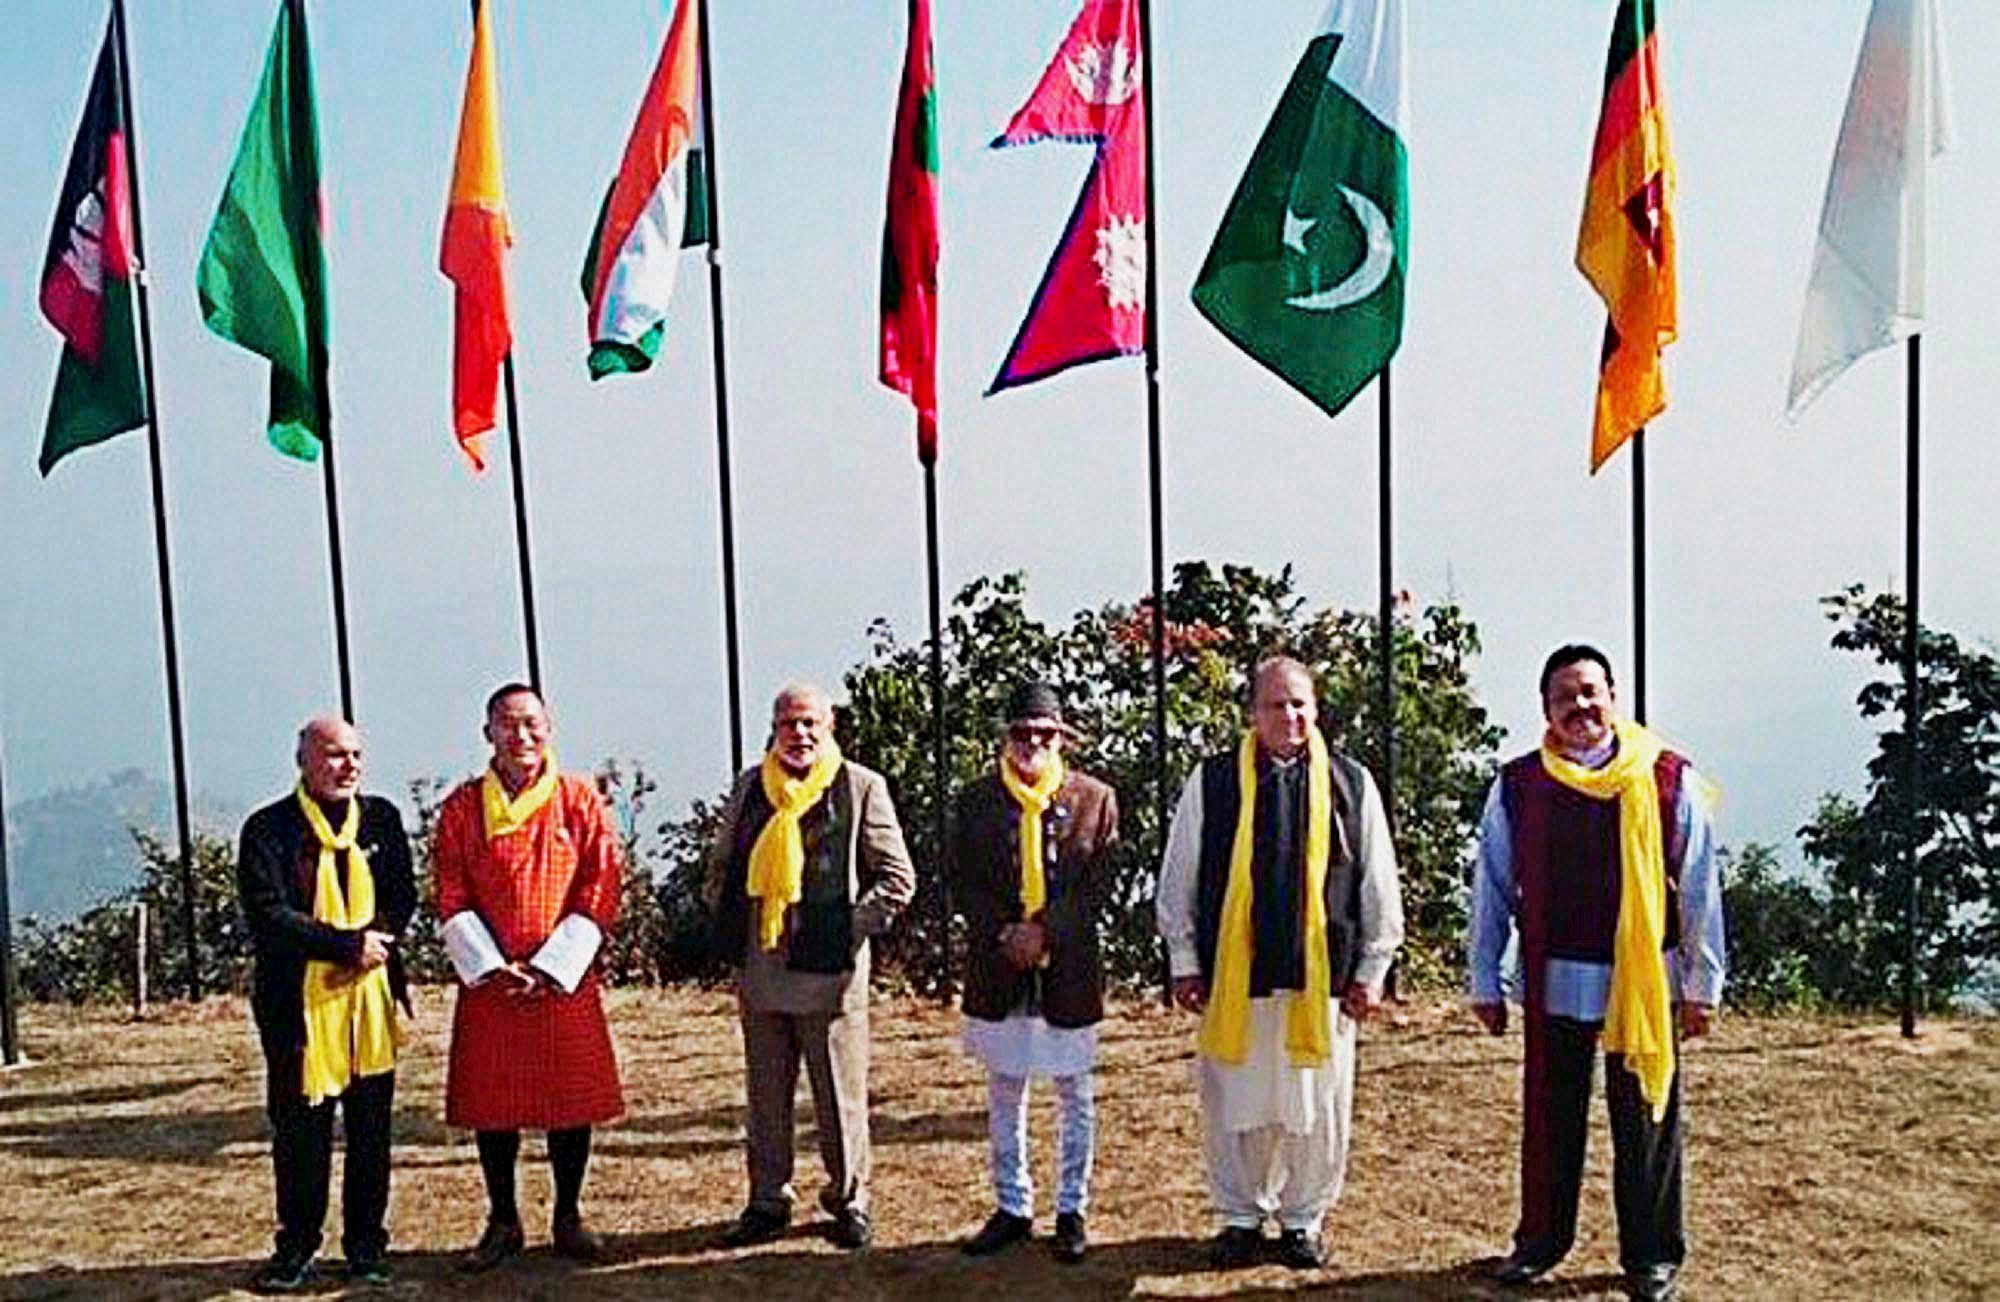 Saarc leaders on Thursday renewed their commitment to achieve South Asian Economic Union in a phased and planned manner through a Free Trade Area, a Customs Union, a Common Market, and a Common Economic and Monetary Union. PTI photo